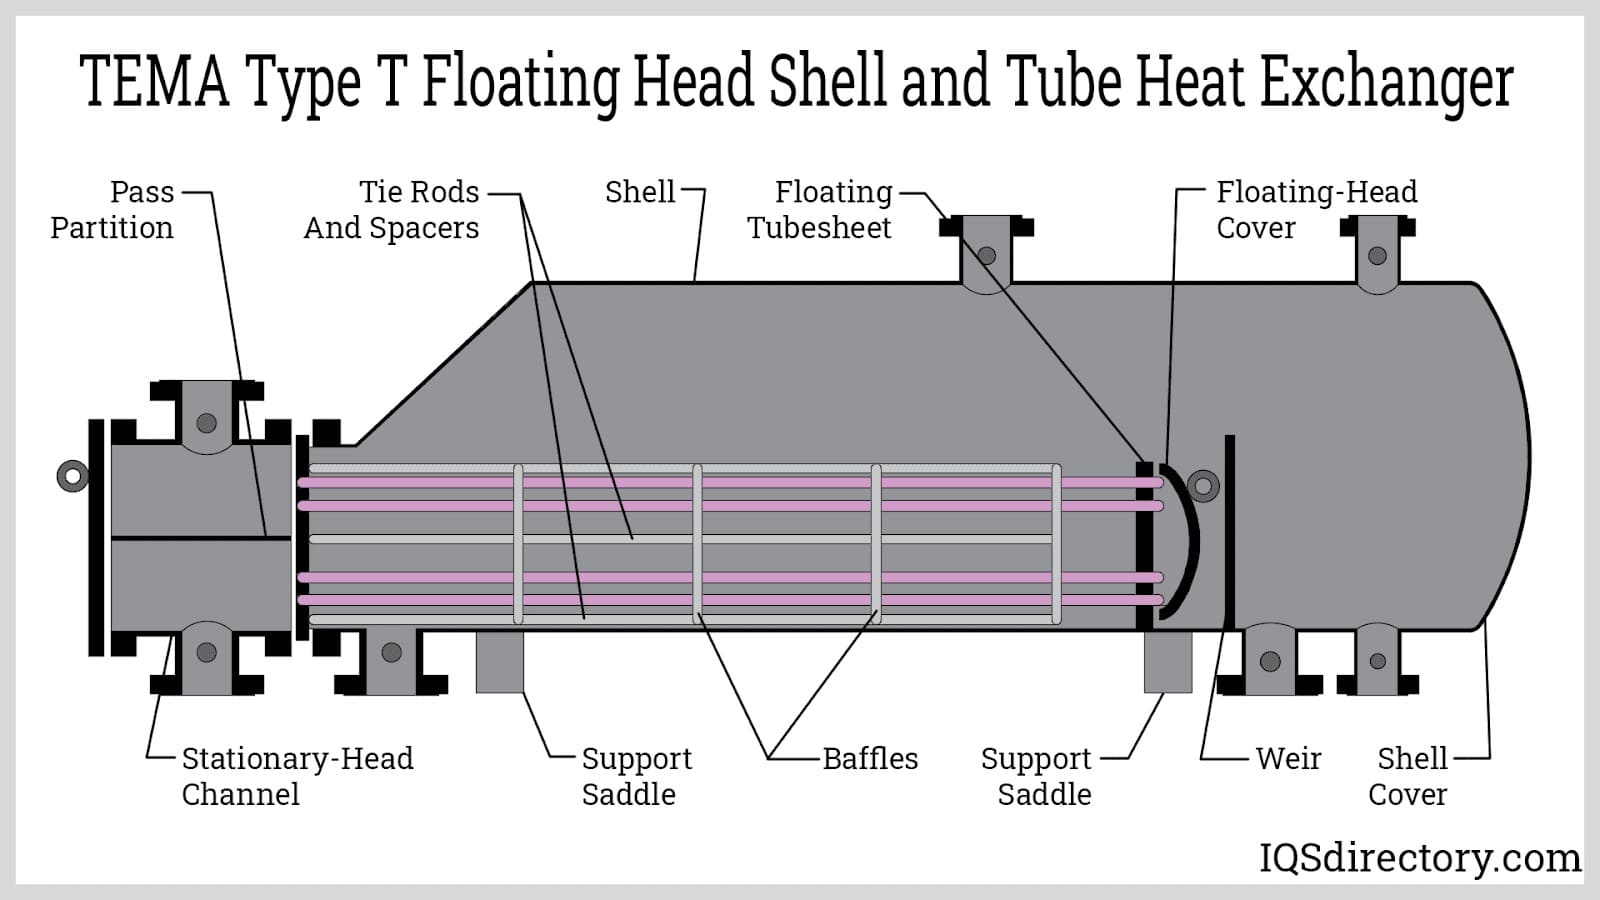 TEMA T Type Floating Head Shell and Tube Heat Exchanger